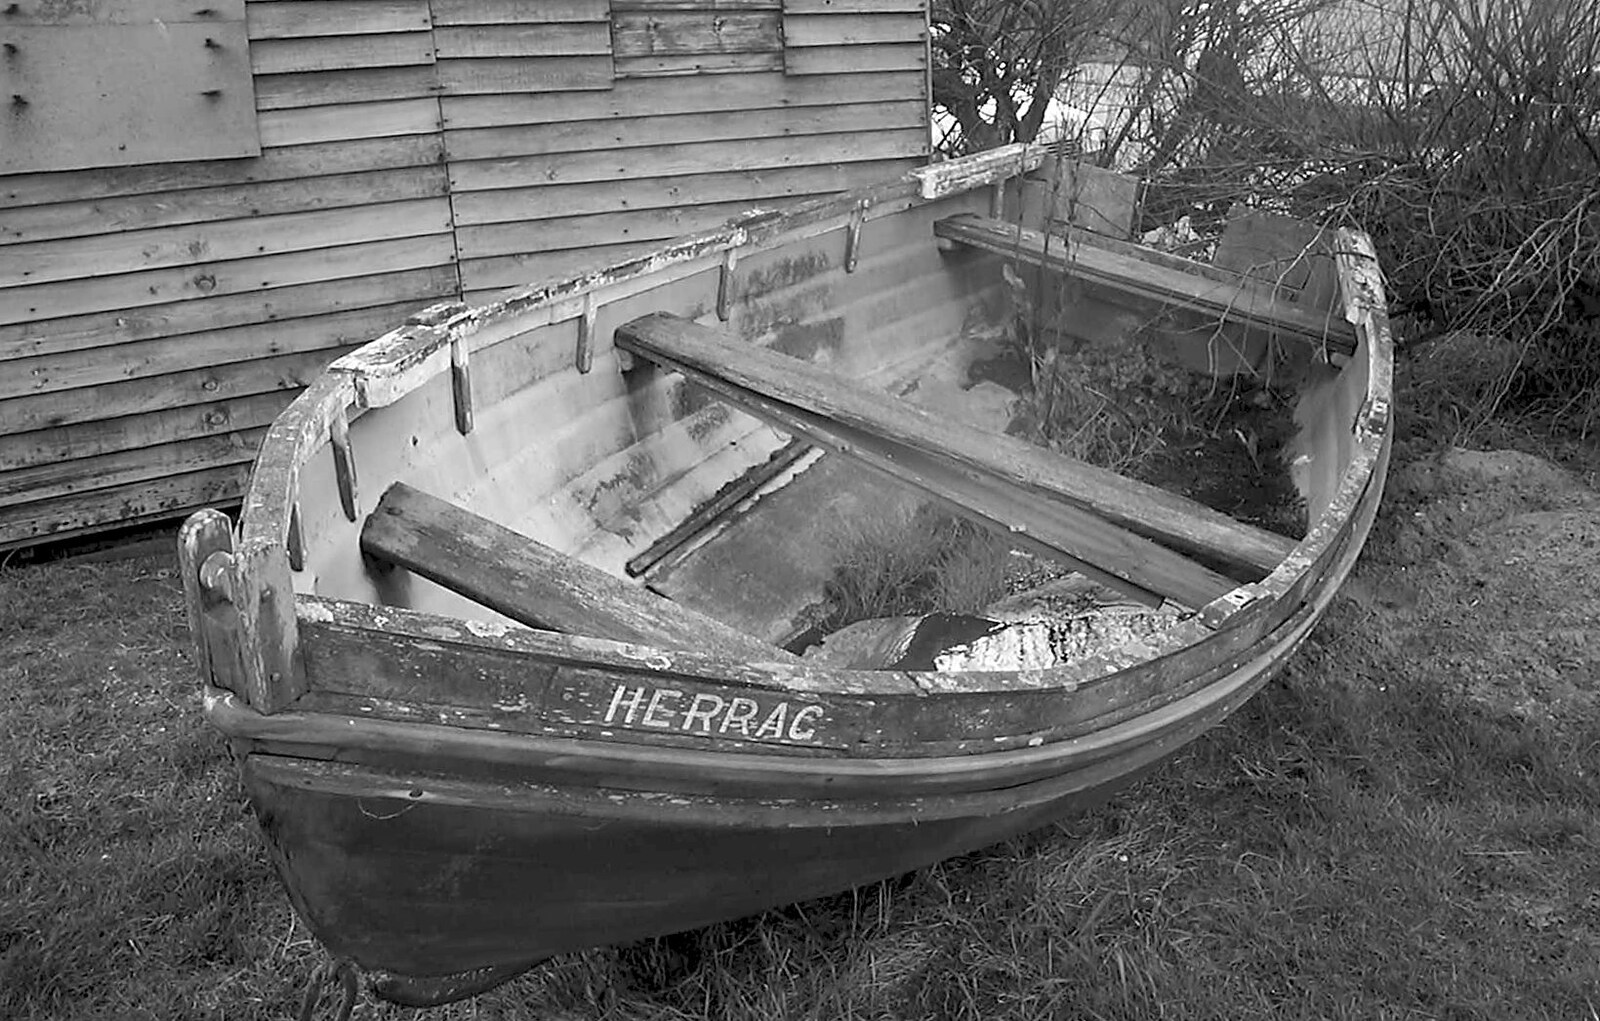 A derelict boat called Herrac from Moping in Southwold, Suffolk - 3rd April 2004